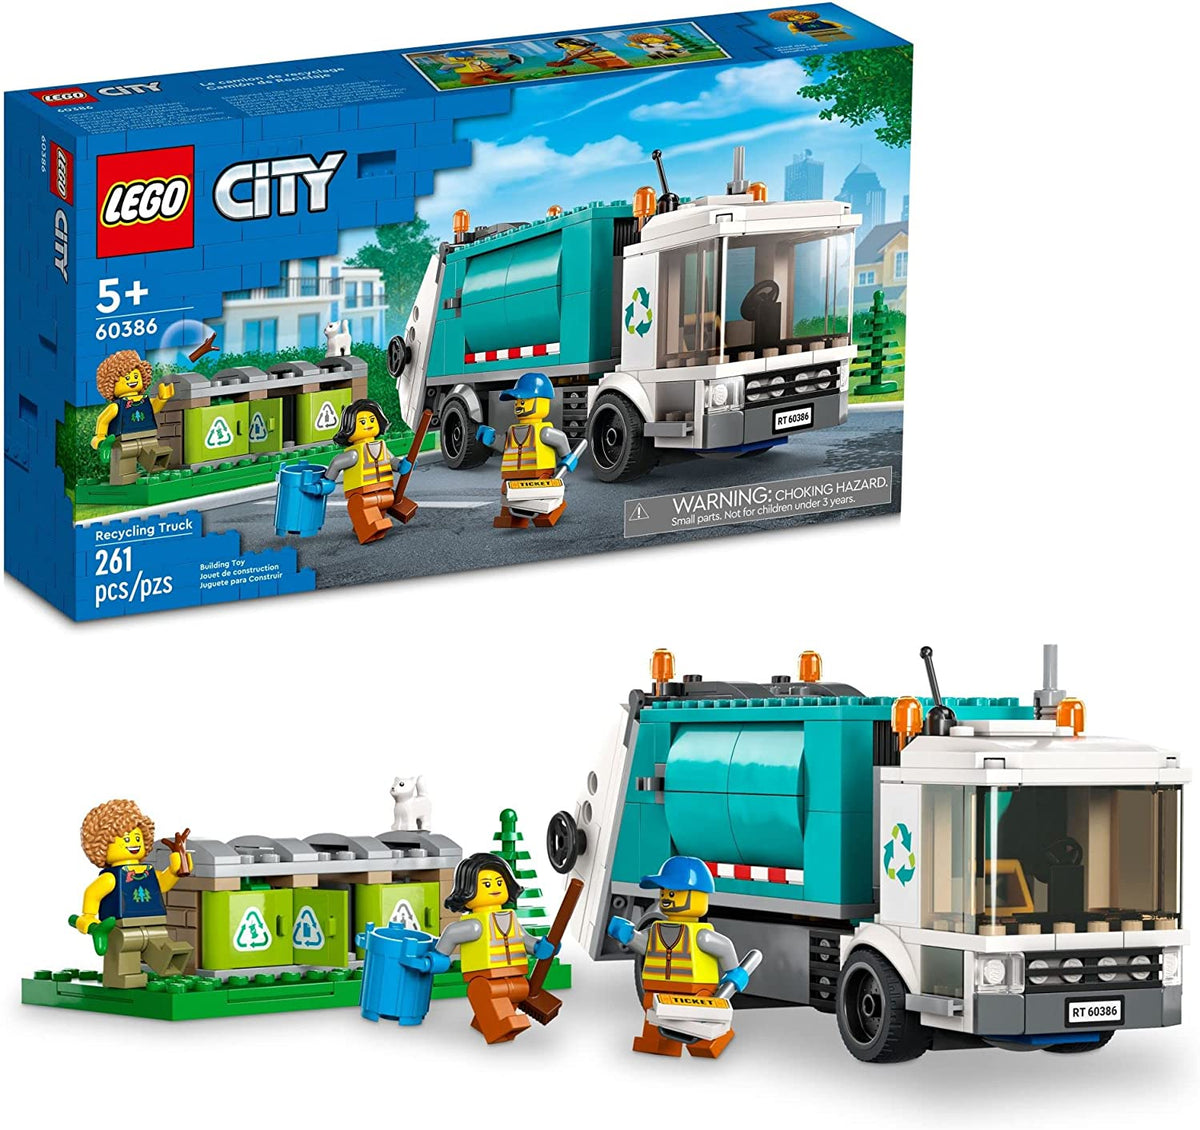 CITY 60386: Recycling Truck